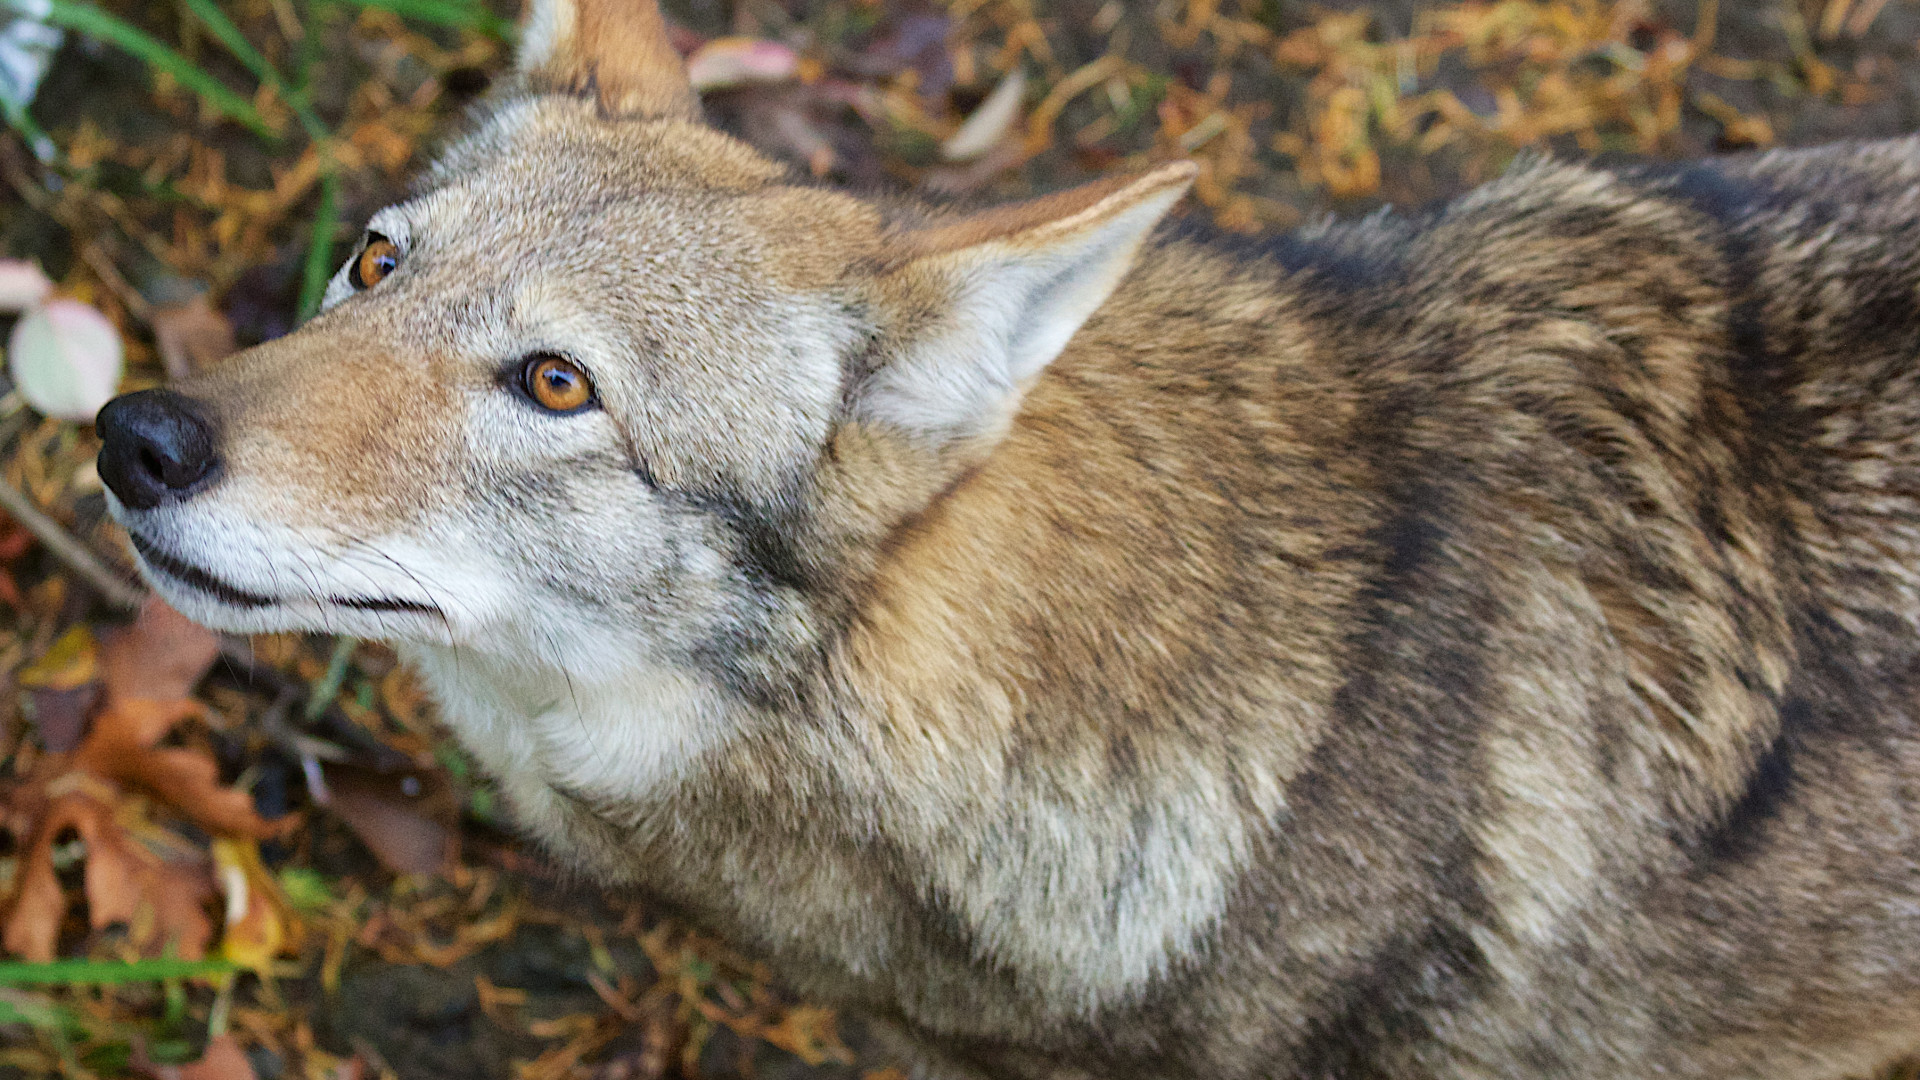 A red wolf with many colored fur stares up while standing on a leaf-covered ground